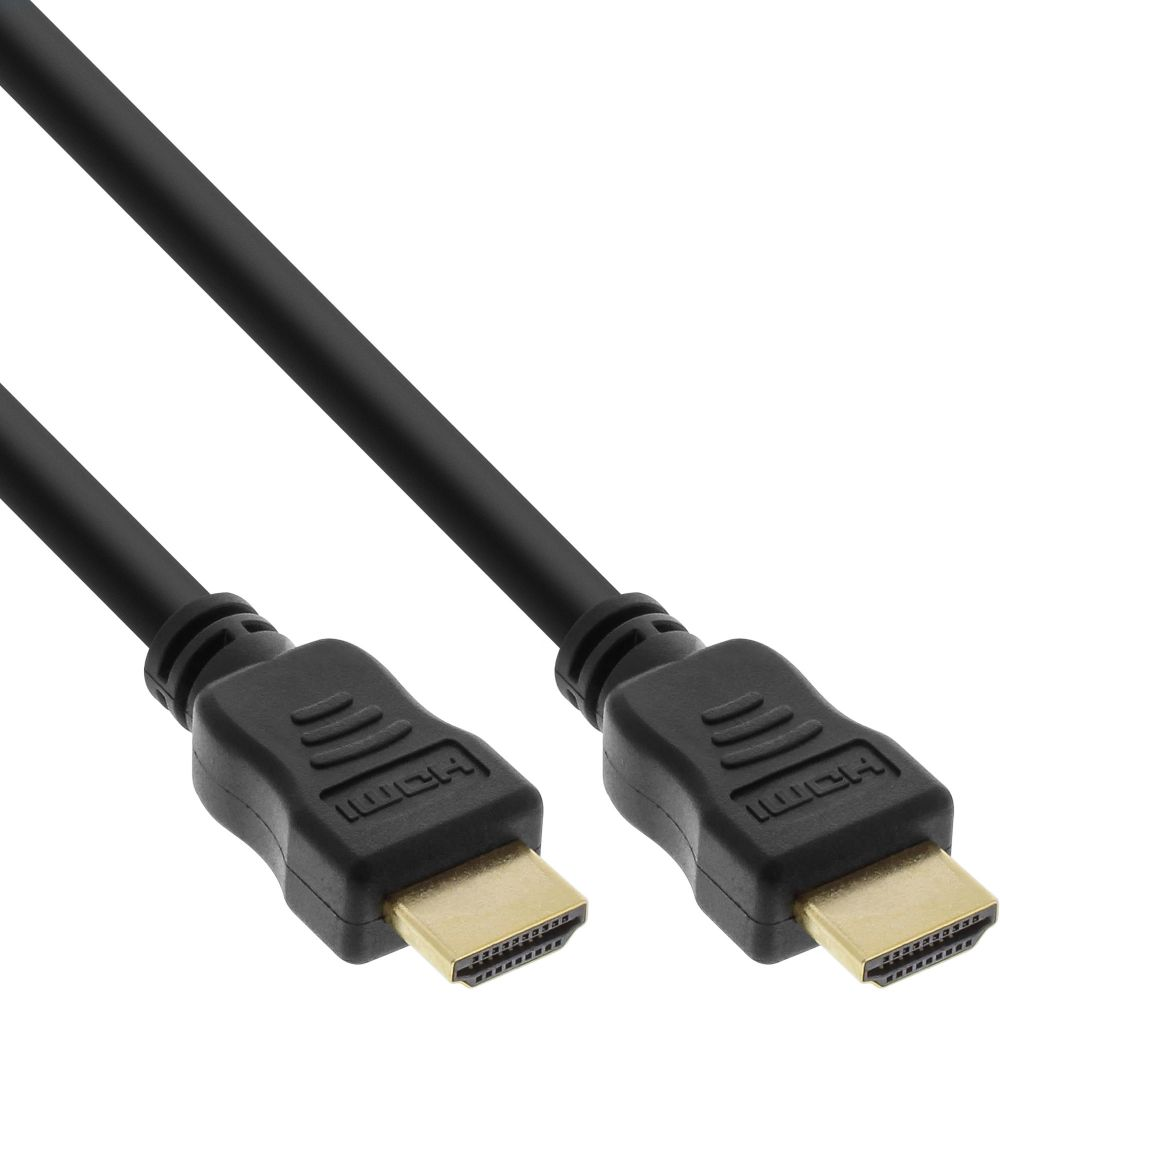 30cm High Speed HDMI-Kabel with Ethernet